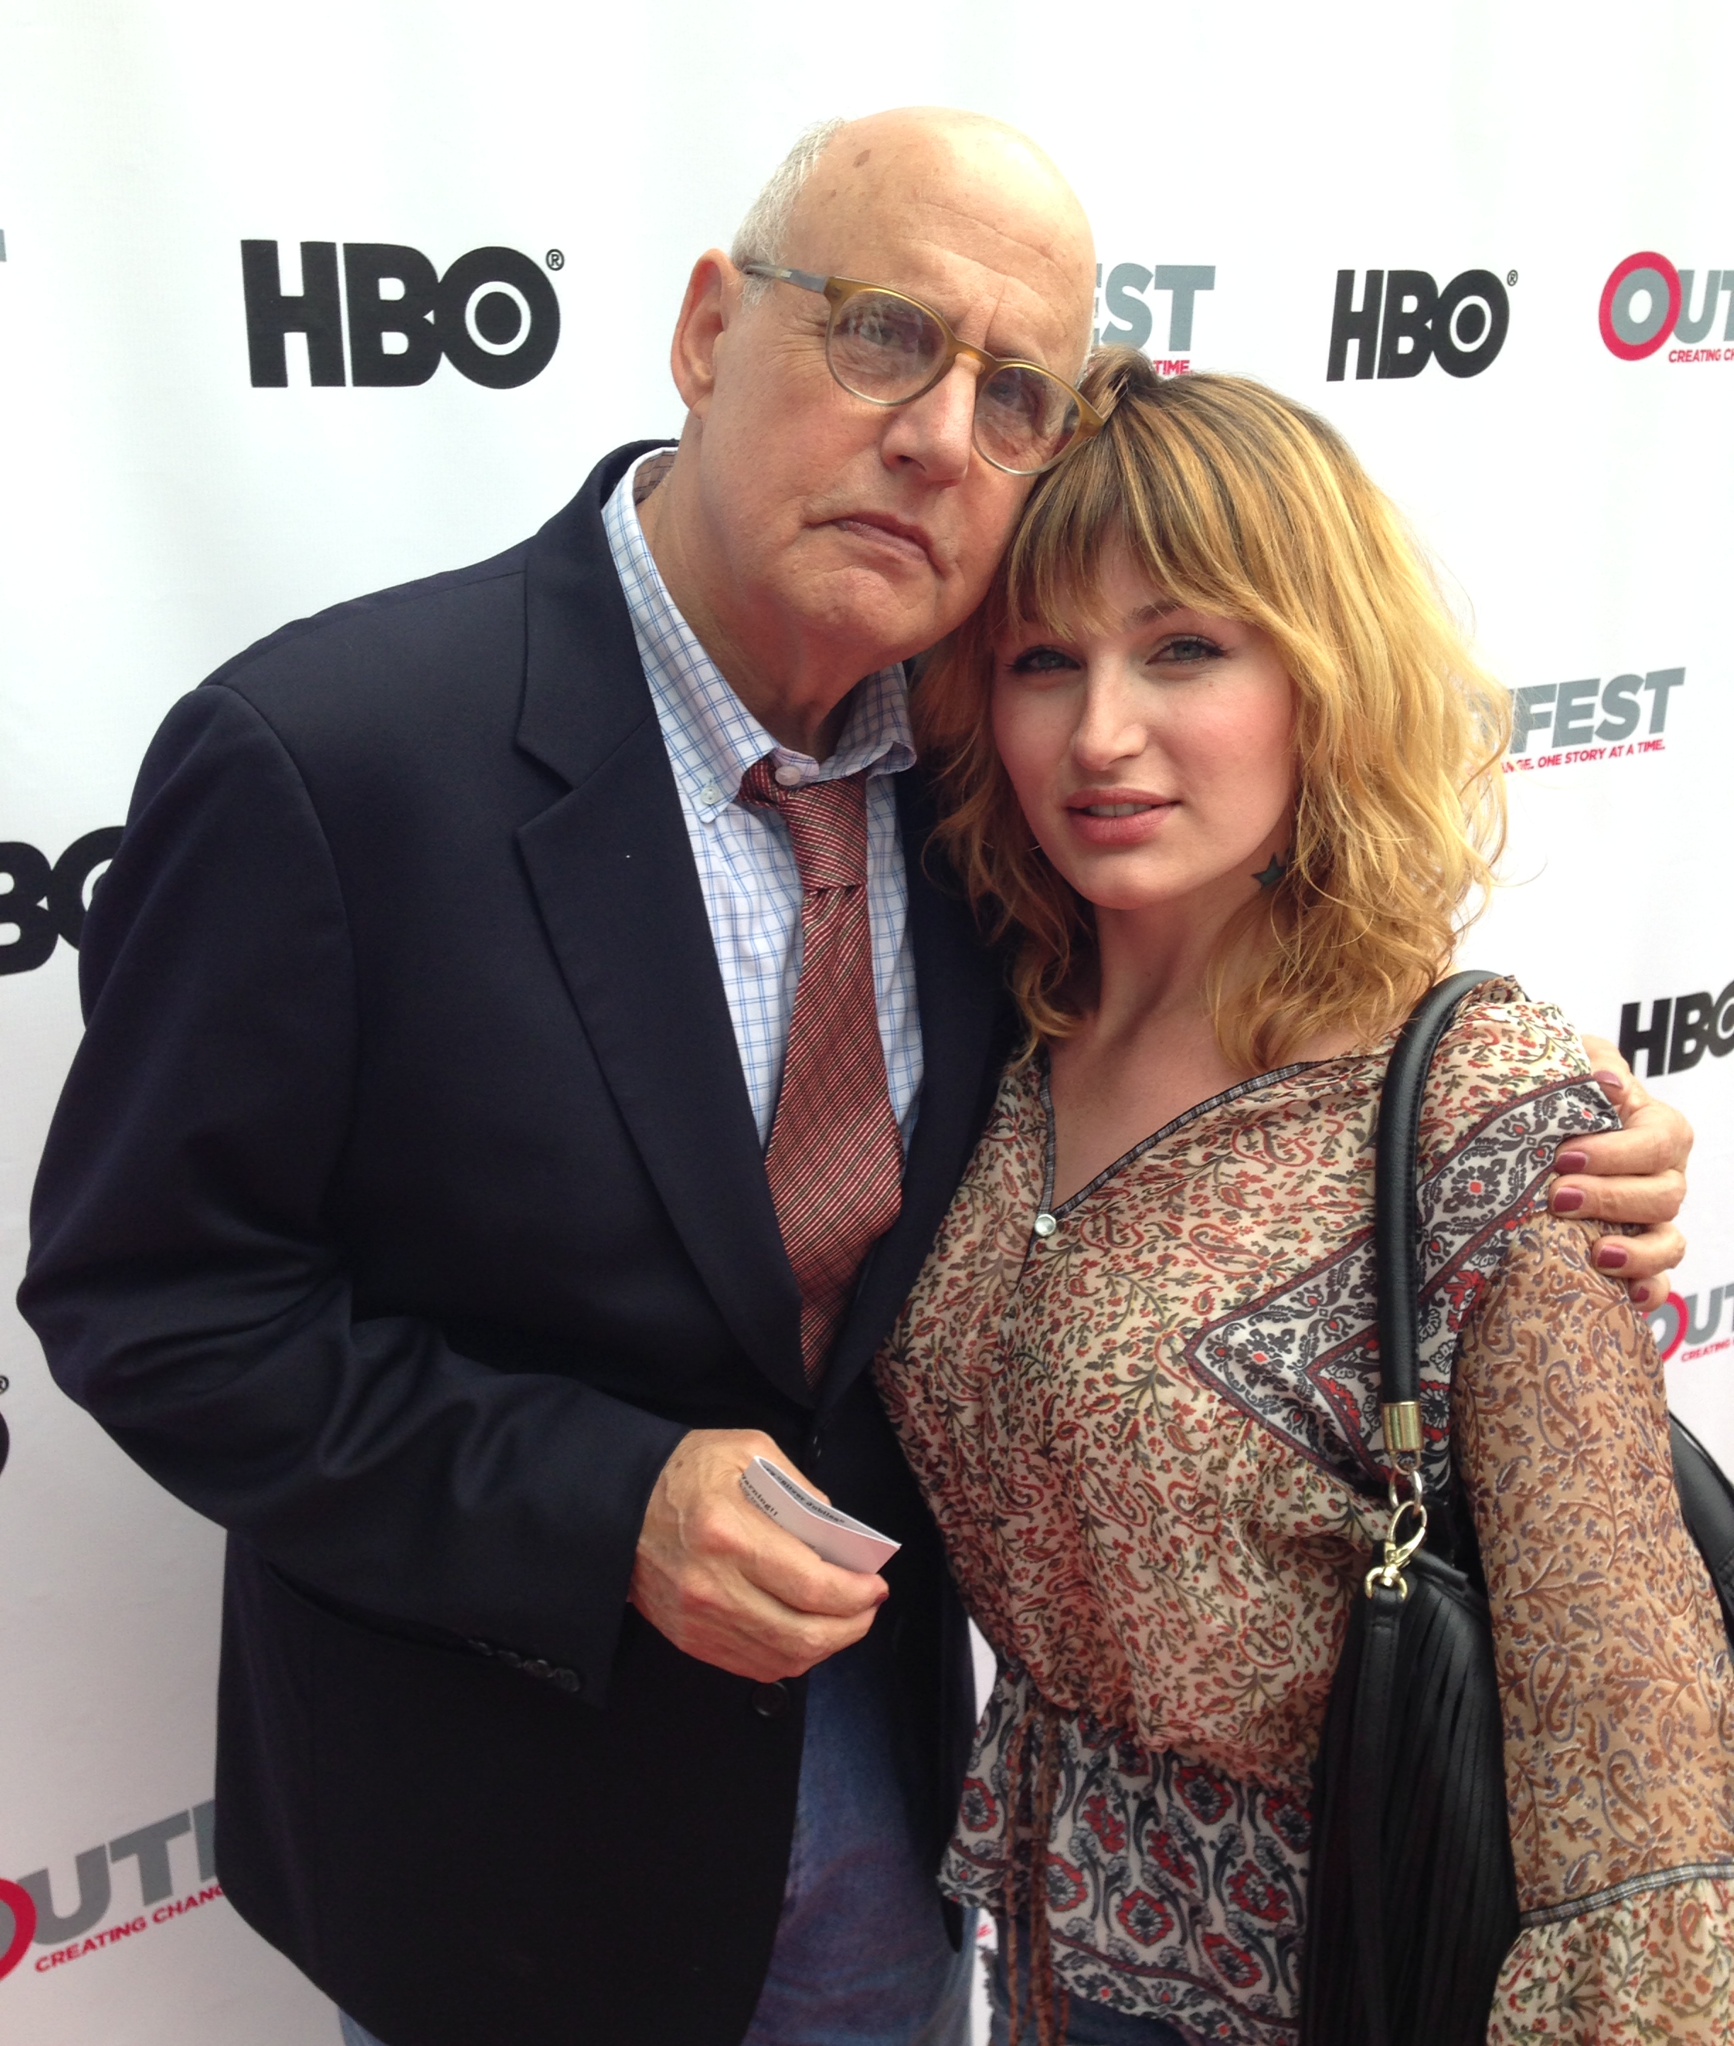 Jeffrey Tambor and Trace Lysette at screening for 'Transparent' at Outfest LA 2014